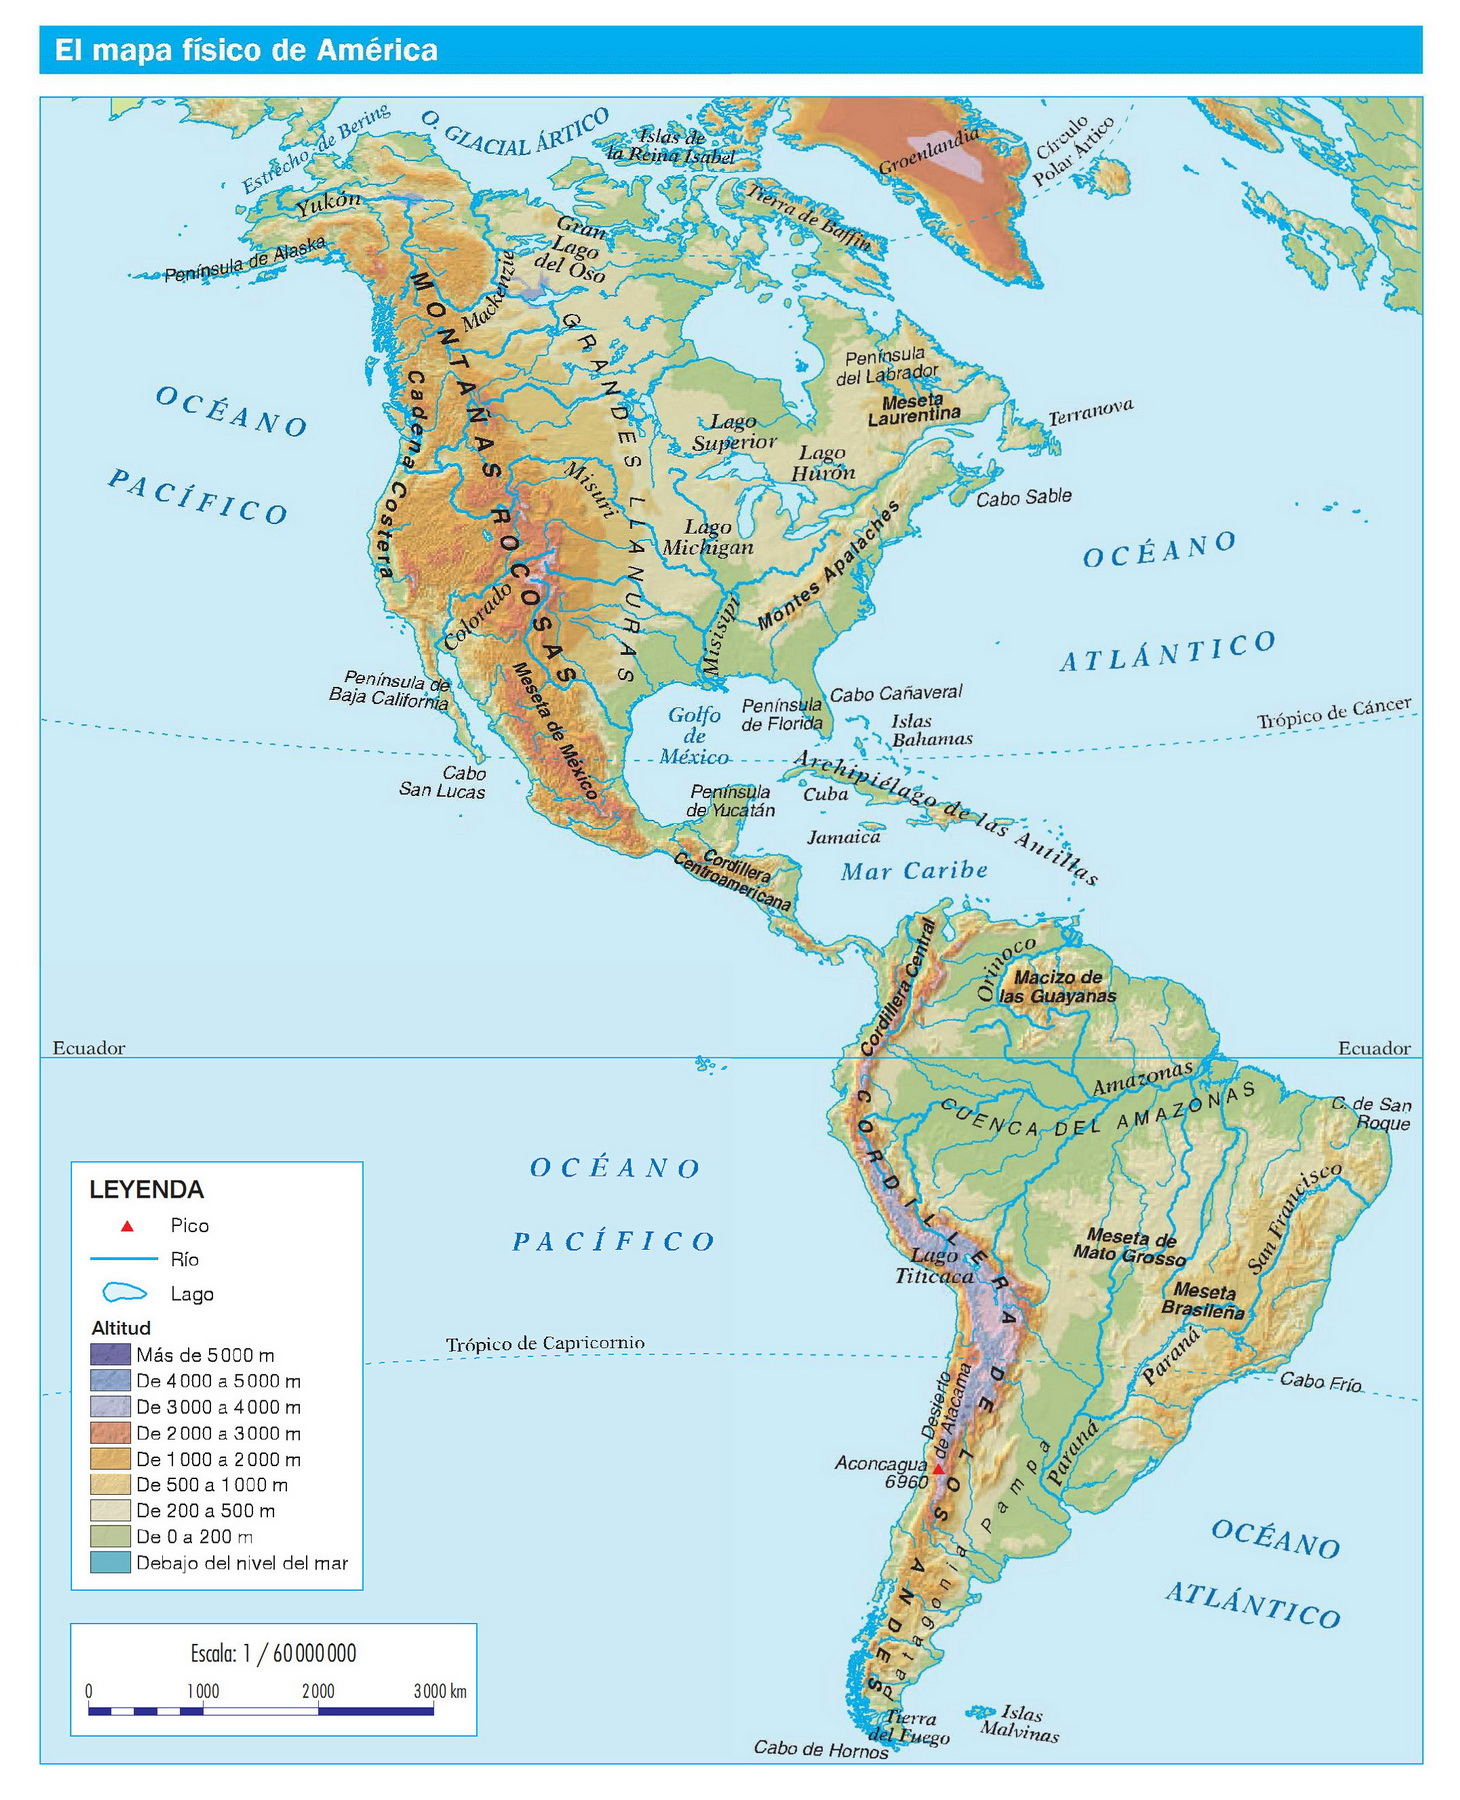 _images/t04-MapaAmericas.png